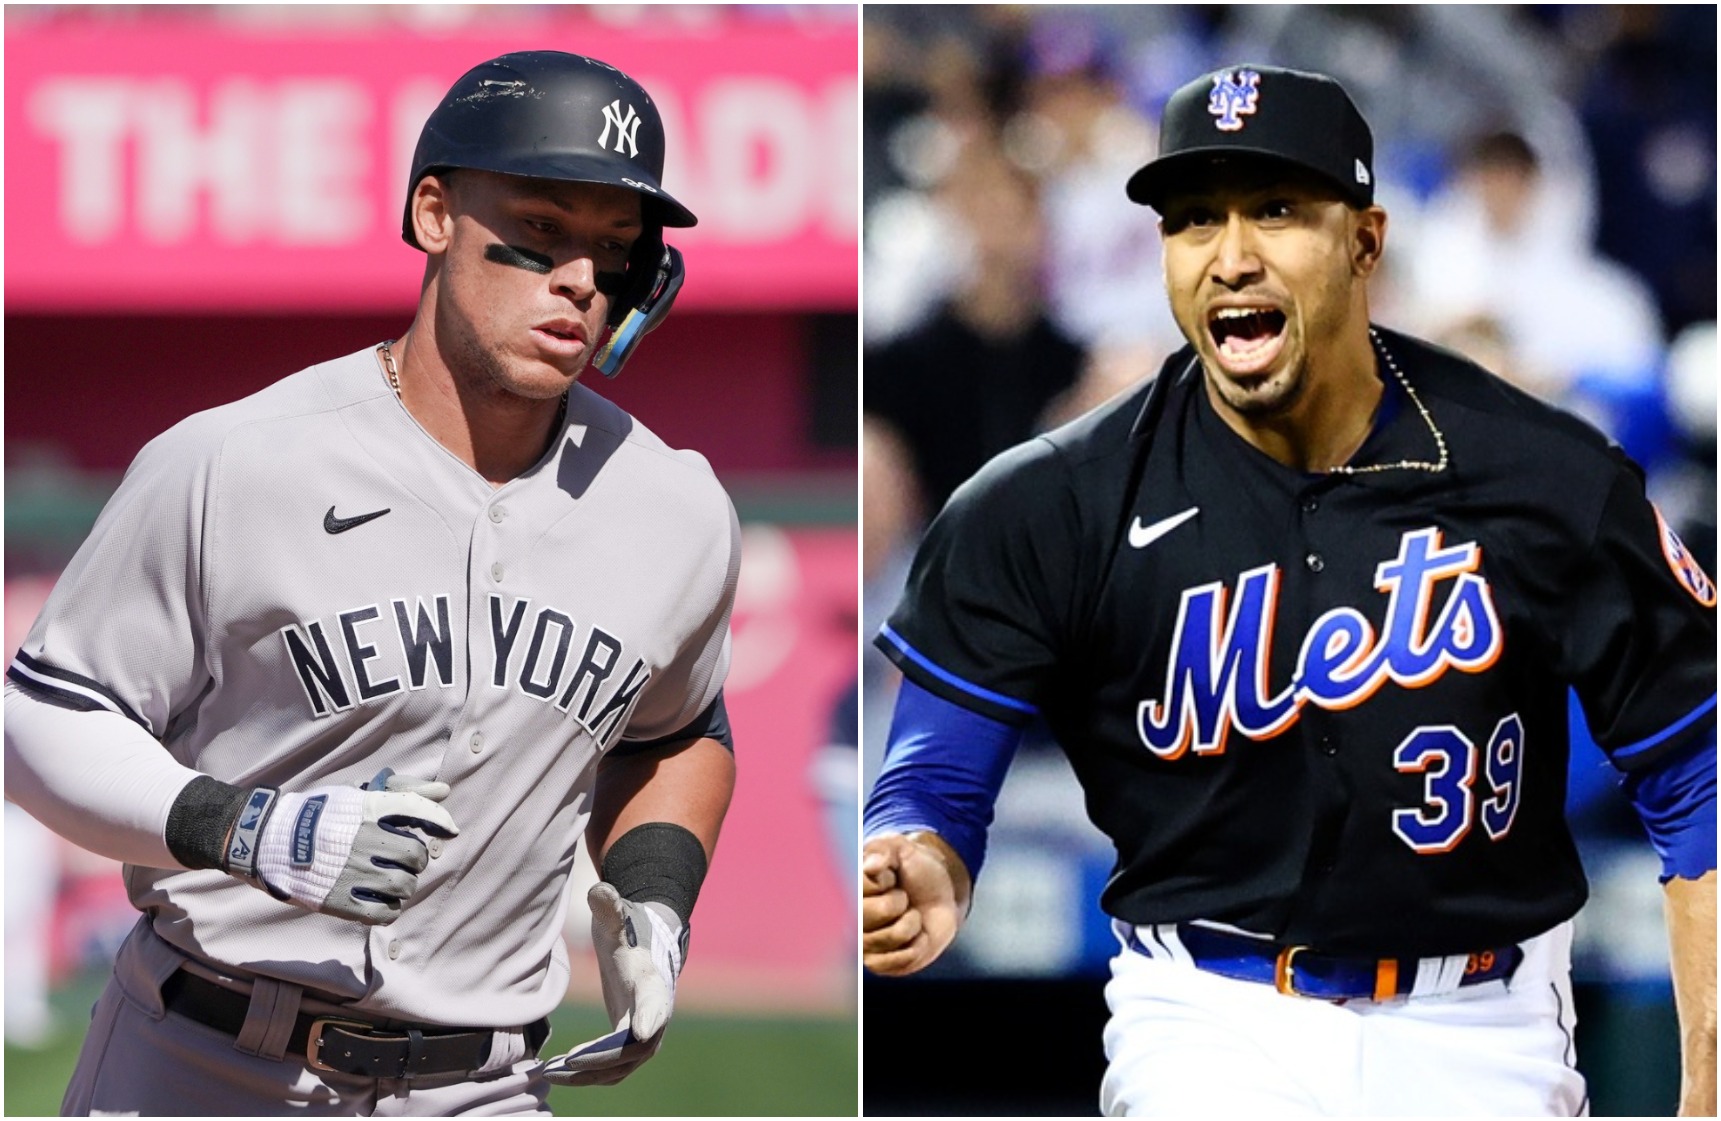 Yankees and Mets showing that baseball is thriving in New York